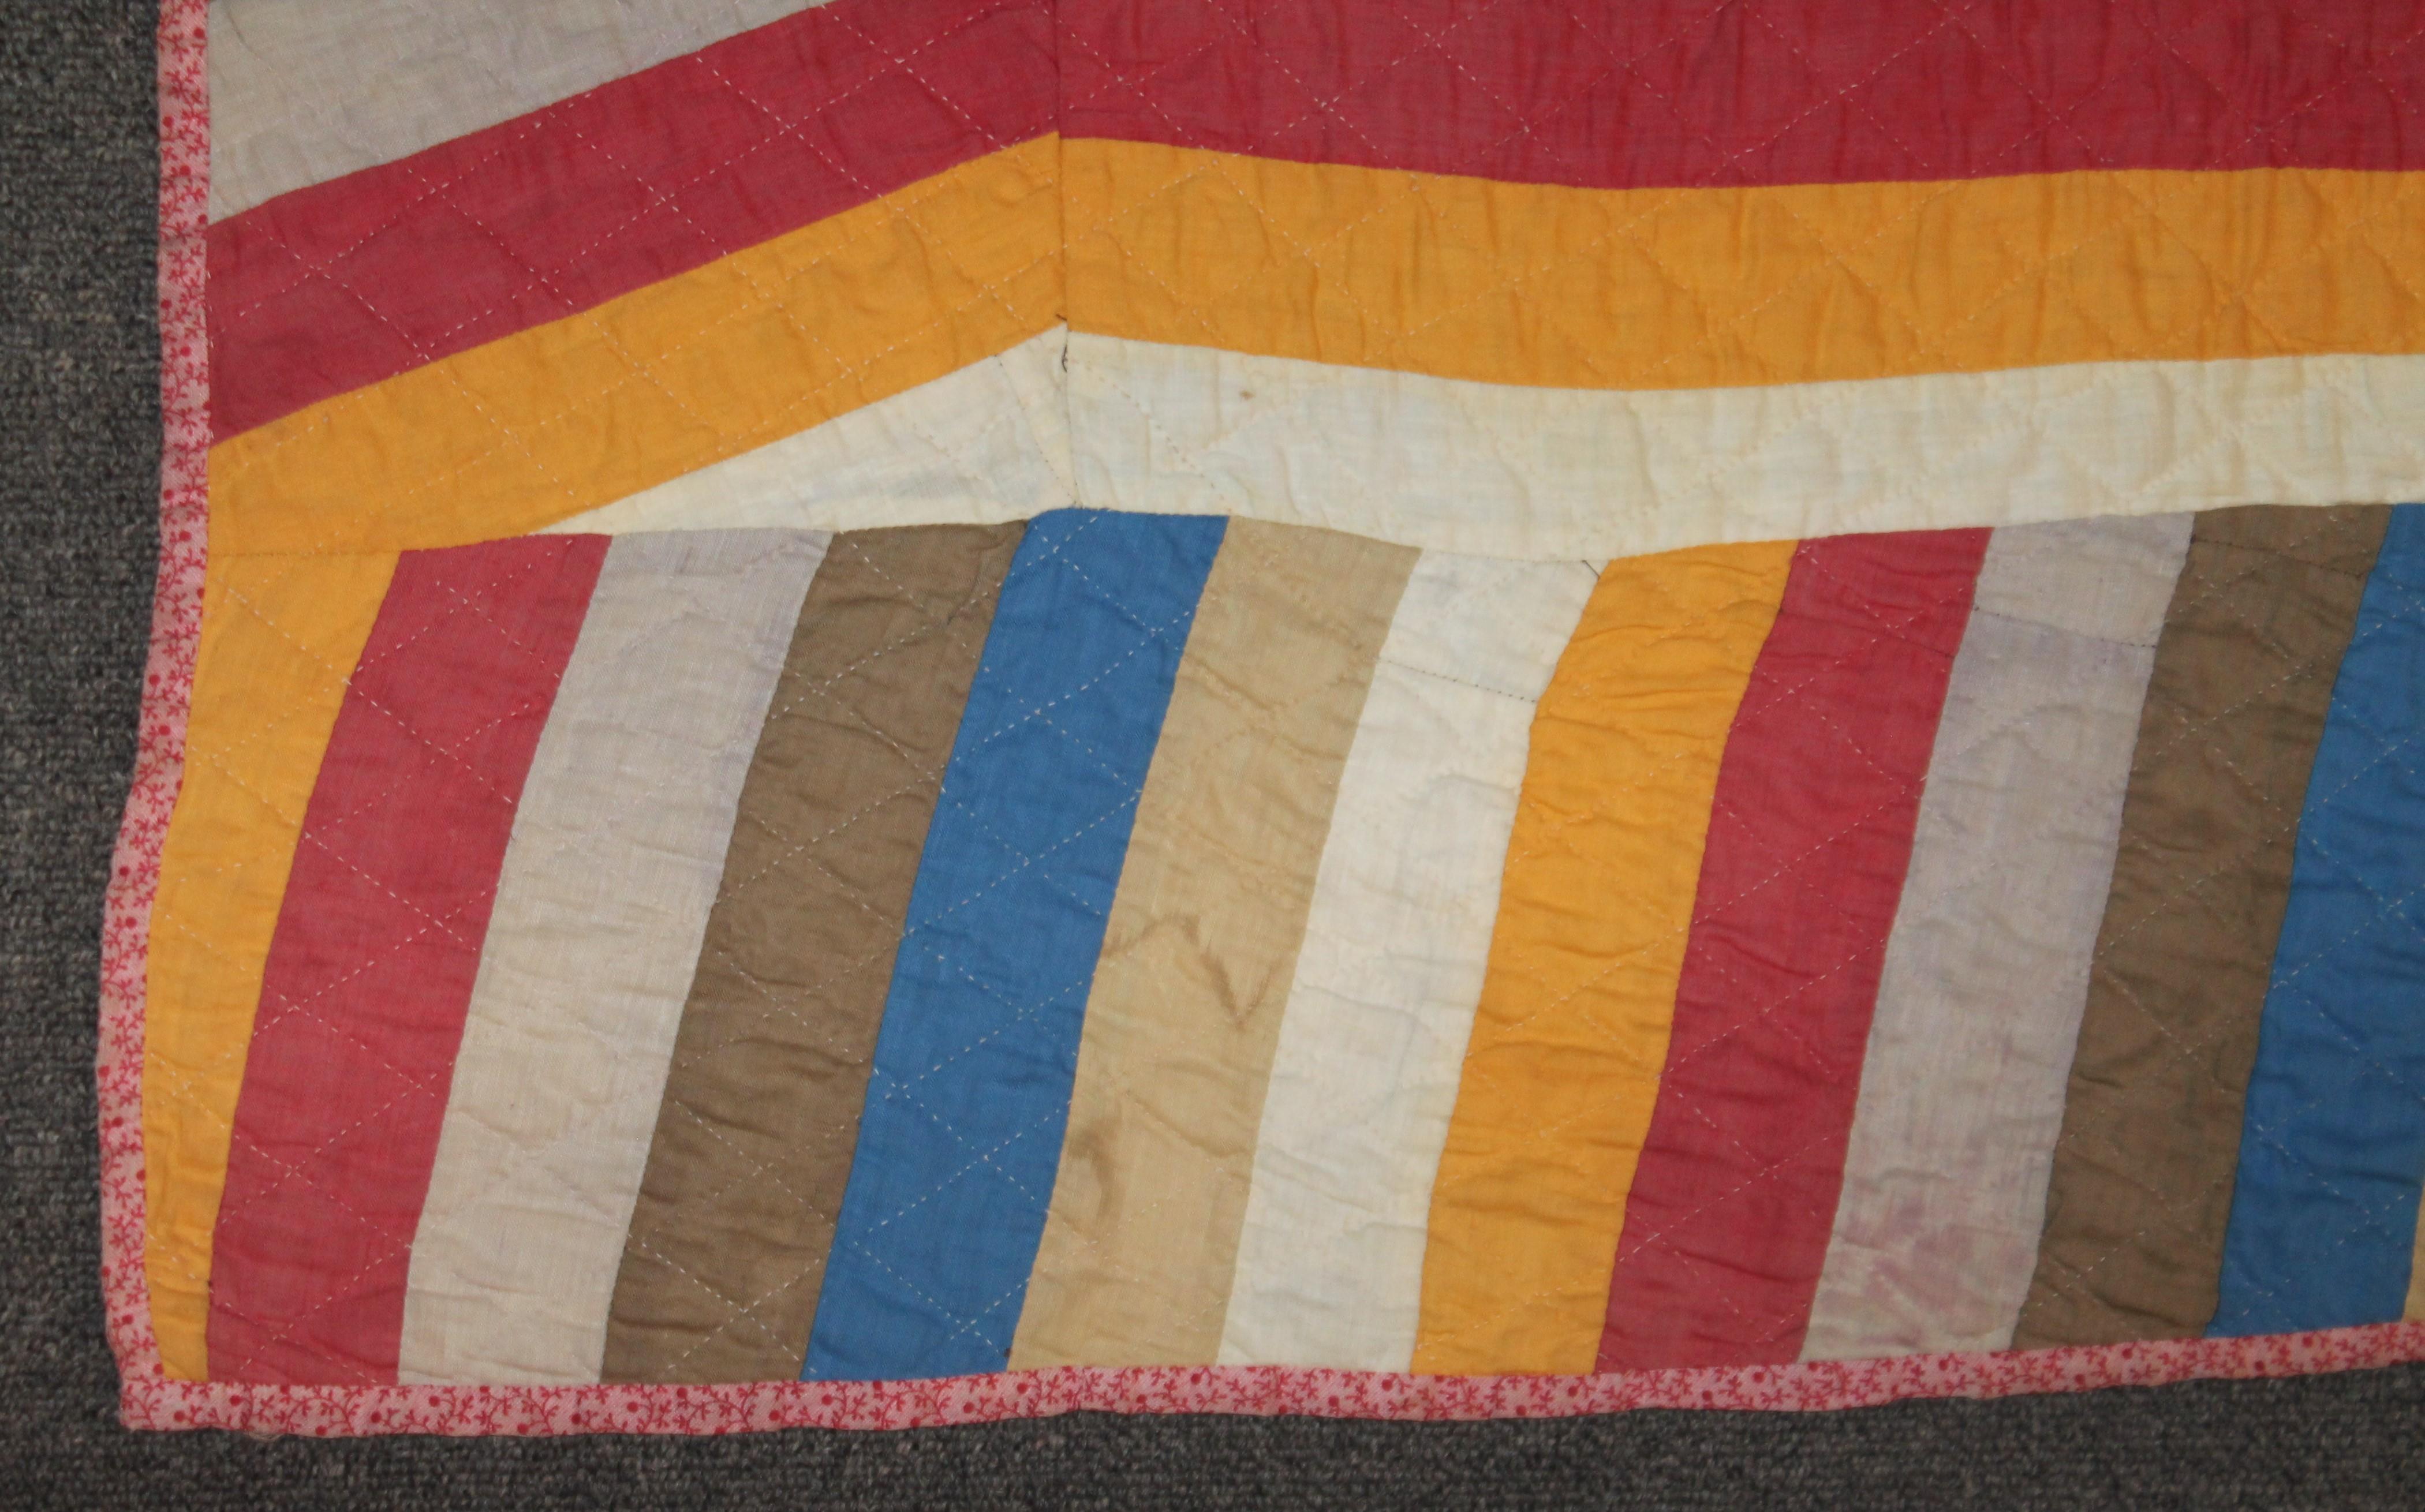 19th Century Jacobs Coat, Split Bars Quilt from Pennsylvania In Good Condition For Sale In Los Angeles, CA